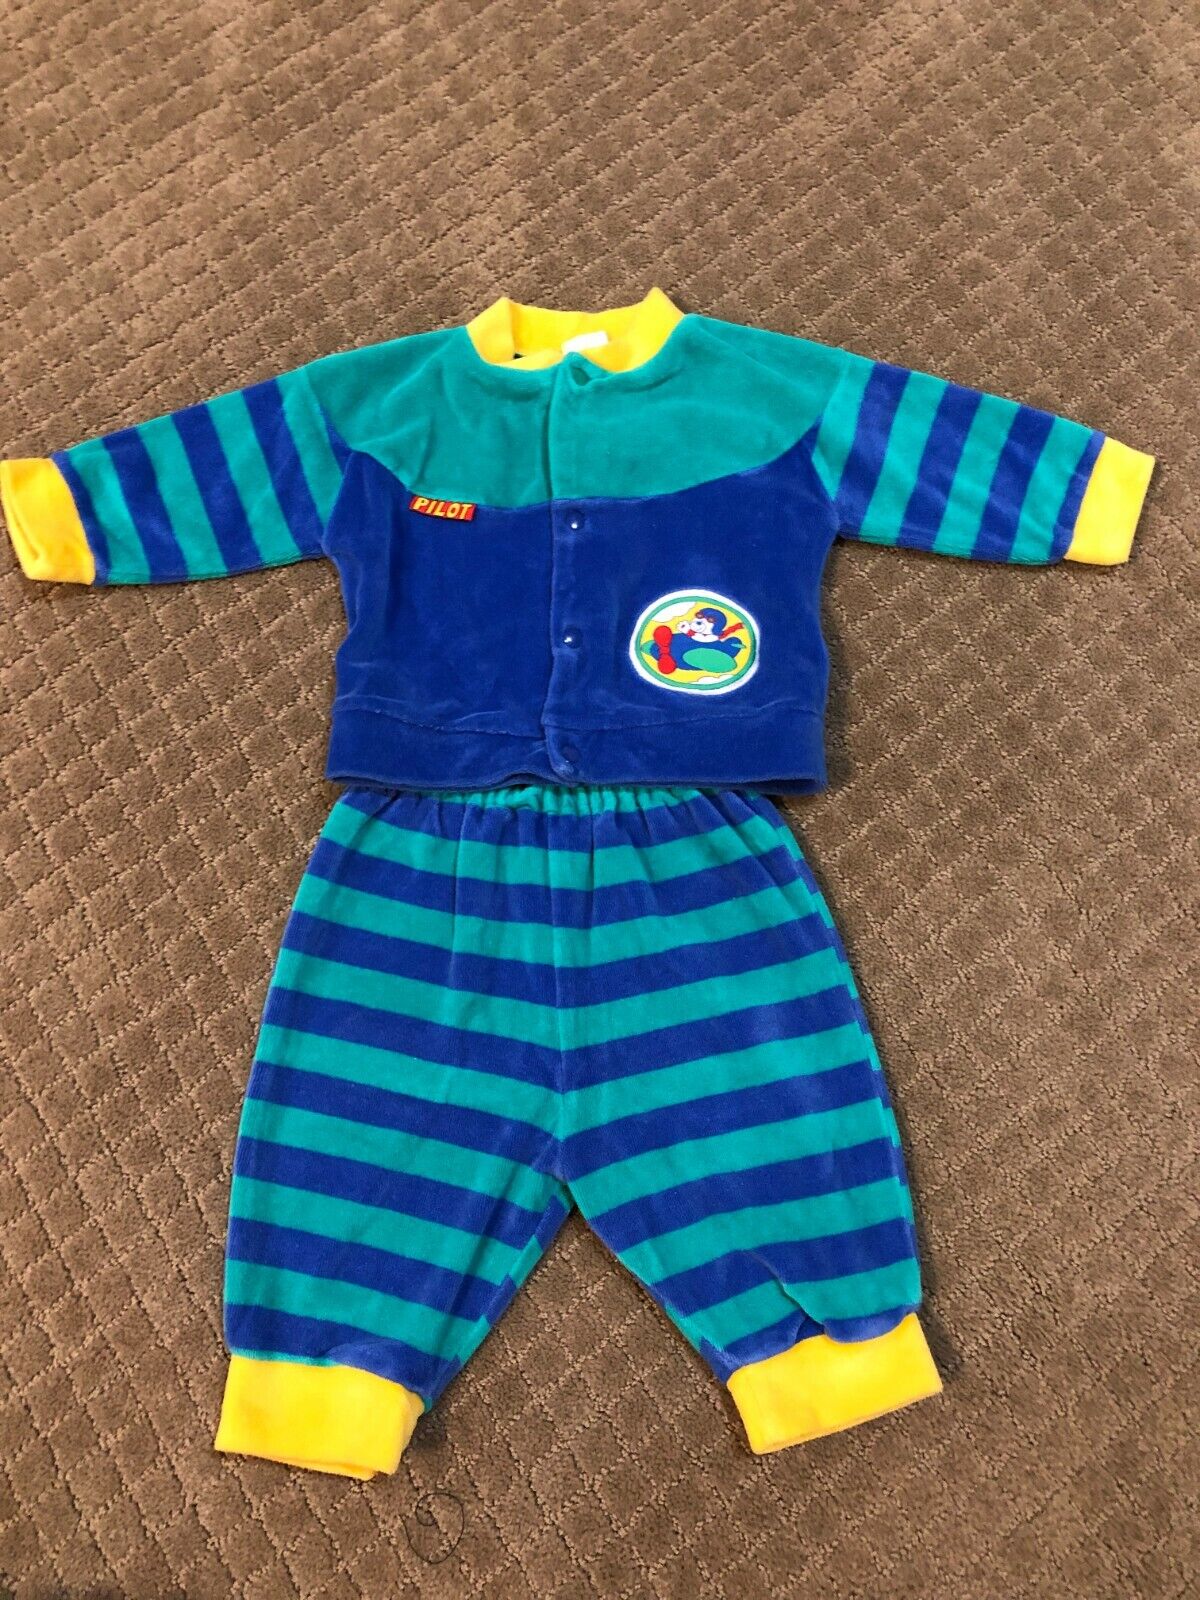 Vintage Baby Boys 2 Pc. Outfit Blue Green Stripes Size 3-6 Months